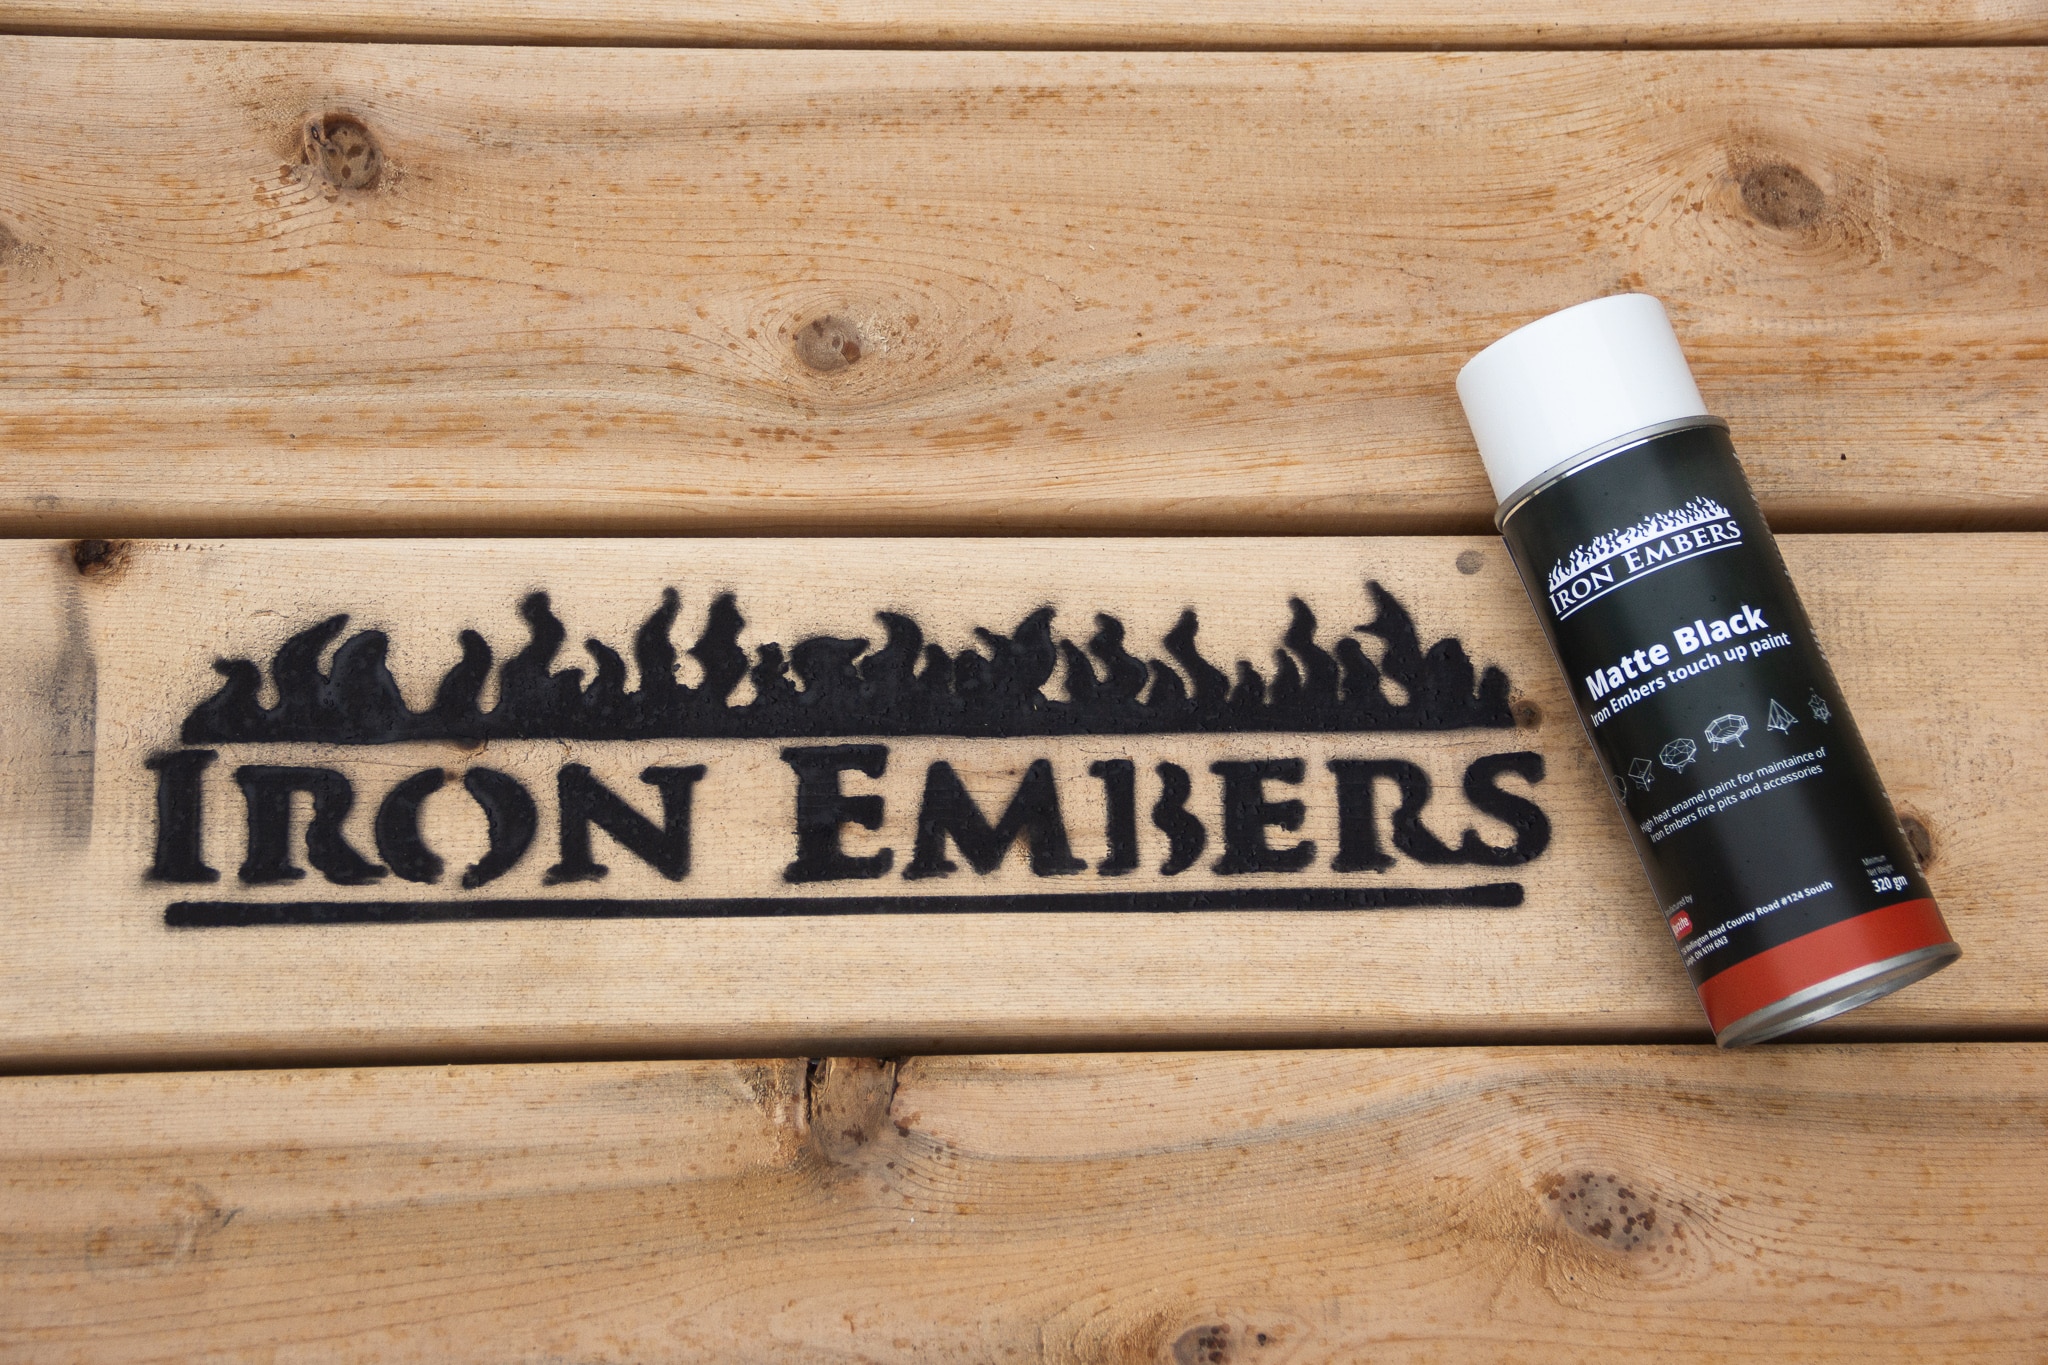 Painted iron embers logo on wood slats with a touch up can of high heat paint